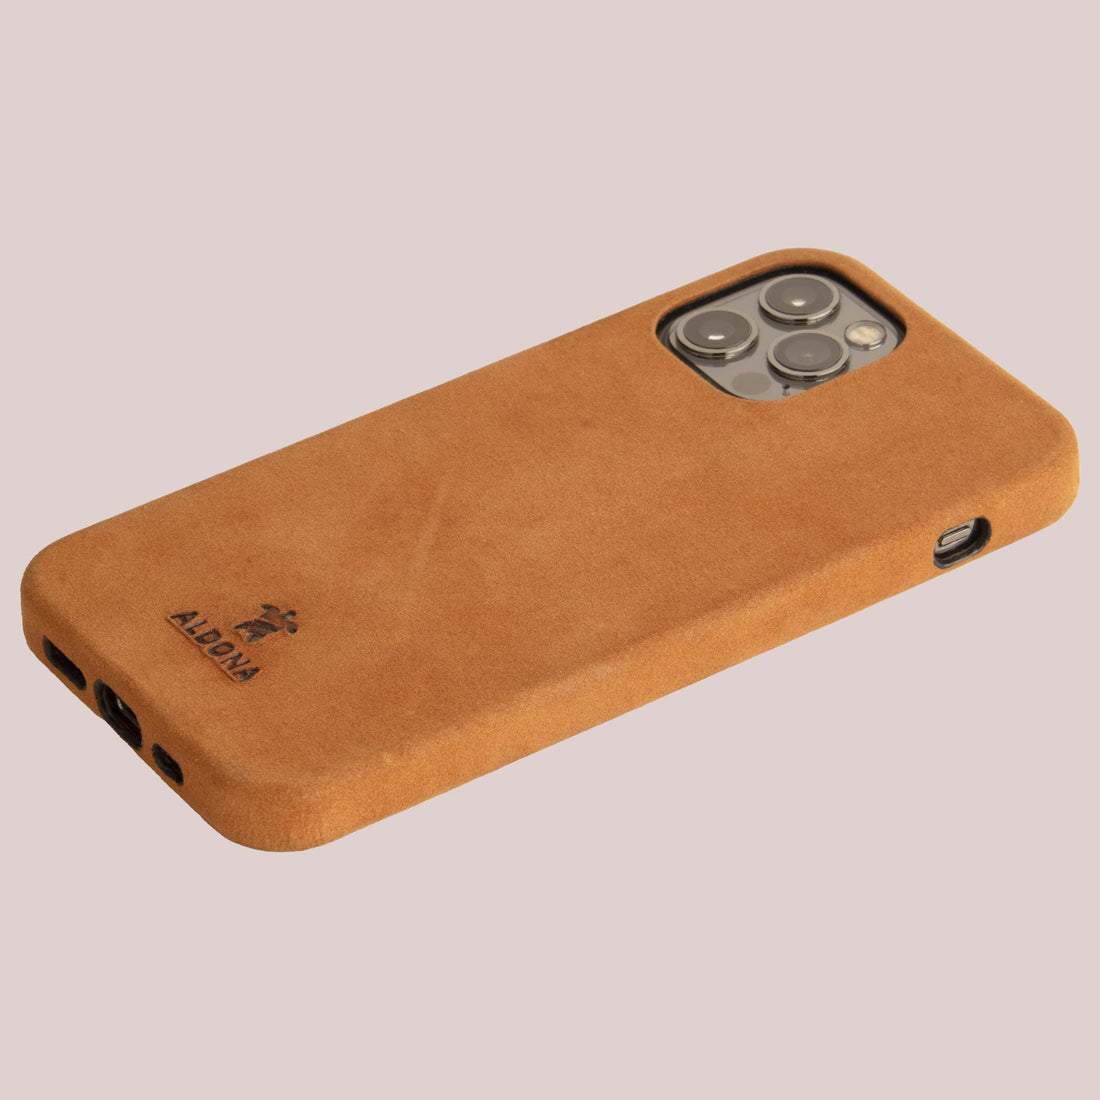 Kalon Case for iPhone 13 Mini with MagSafe Compatibility - Vintage Tan